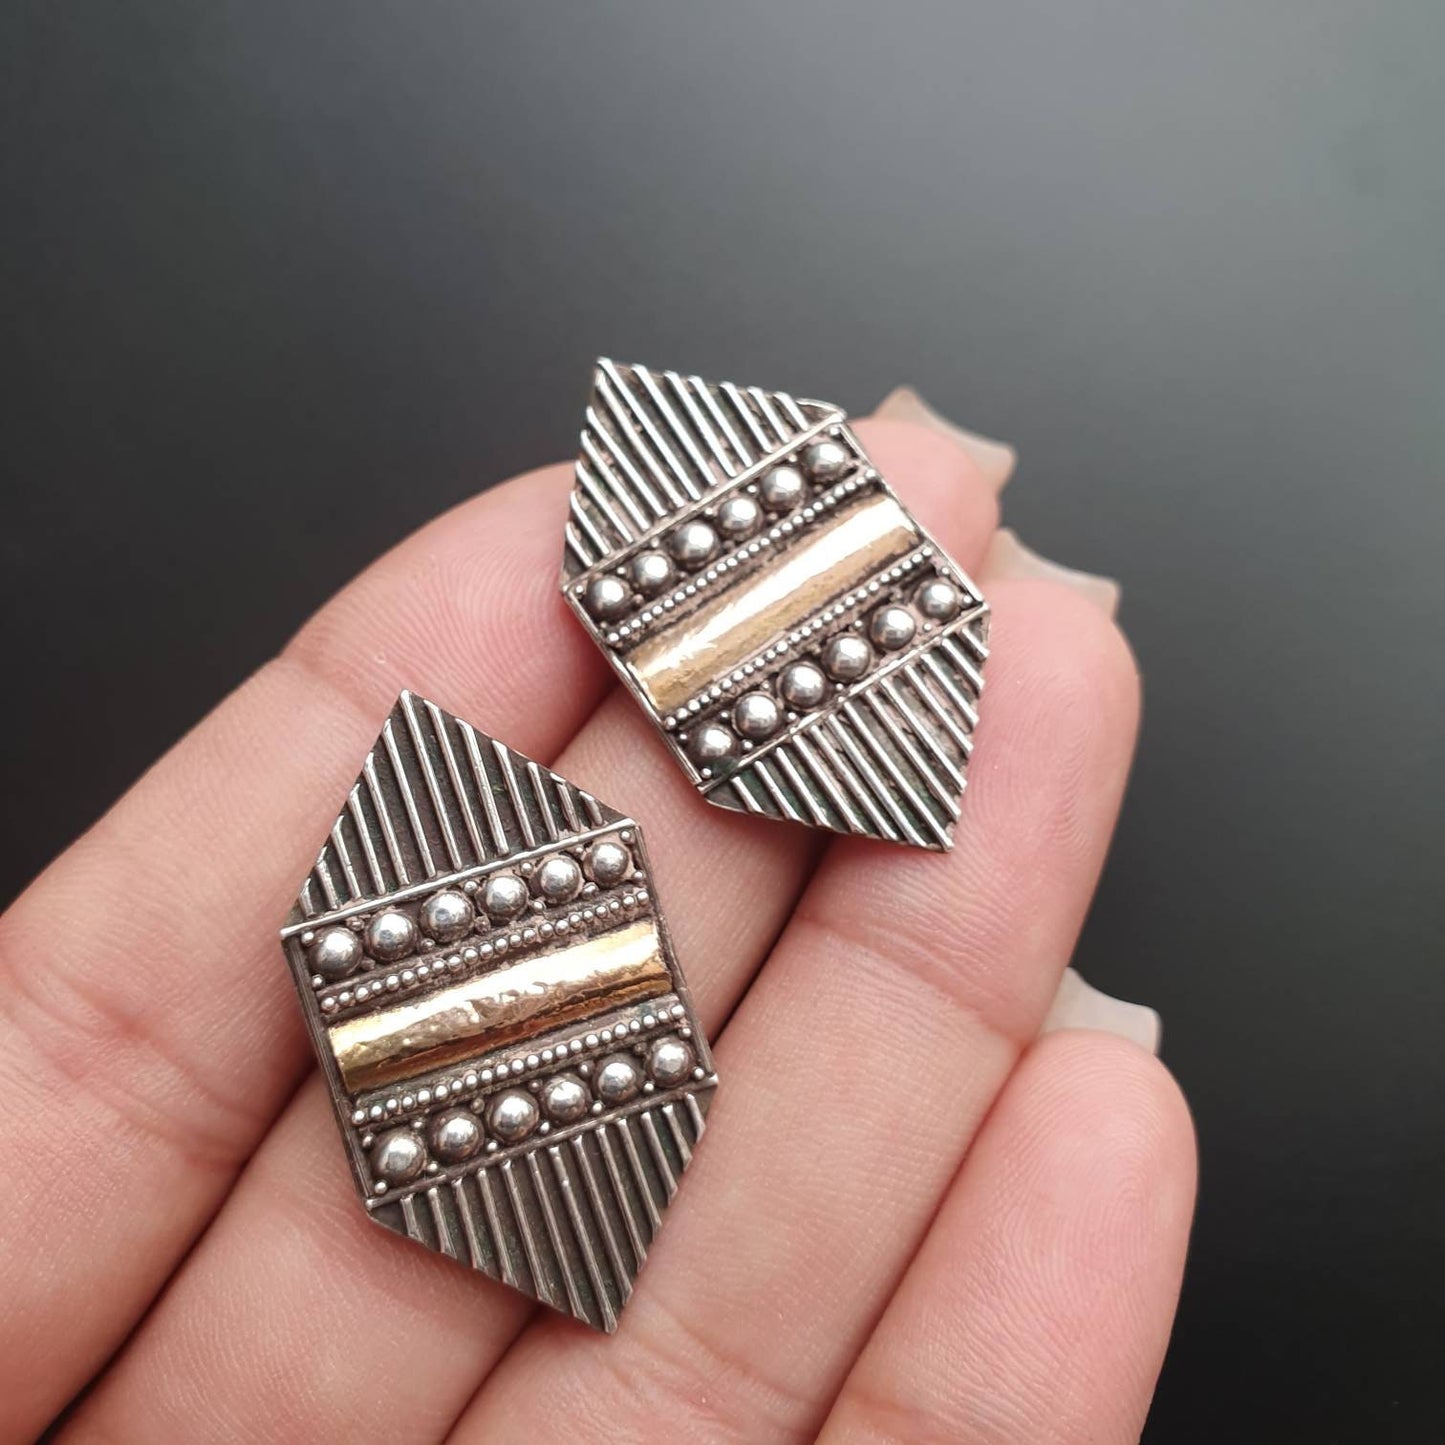 Vintage earrings, stud earrings, pierced ears, Aztec, sterling , tribal, unique,handmade ,elegant and classic, affordable gifts,stylish 925